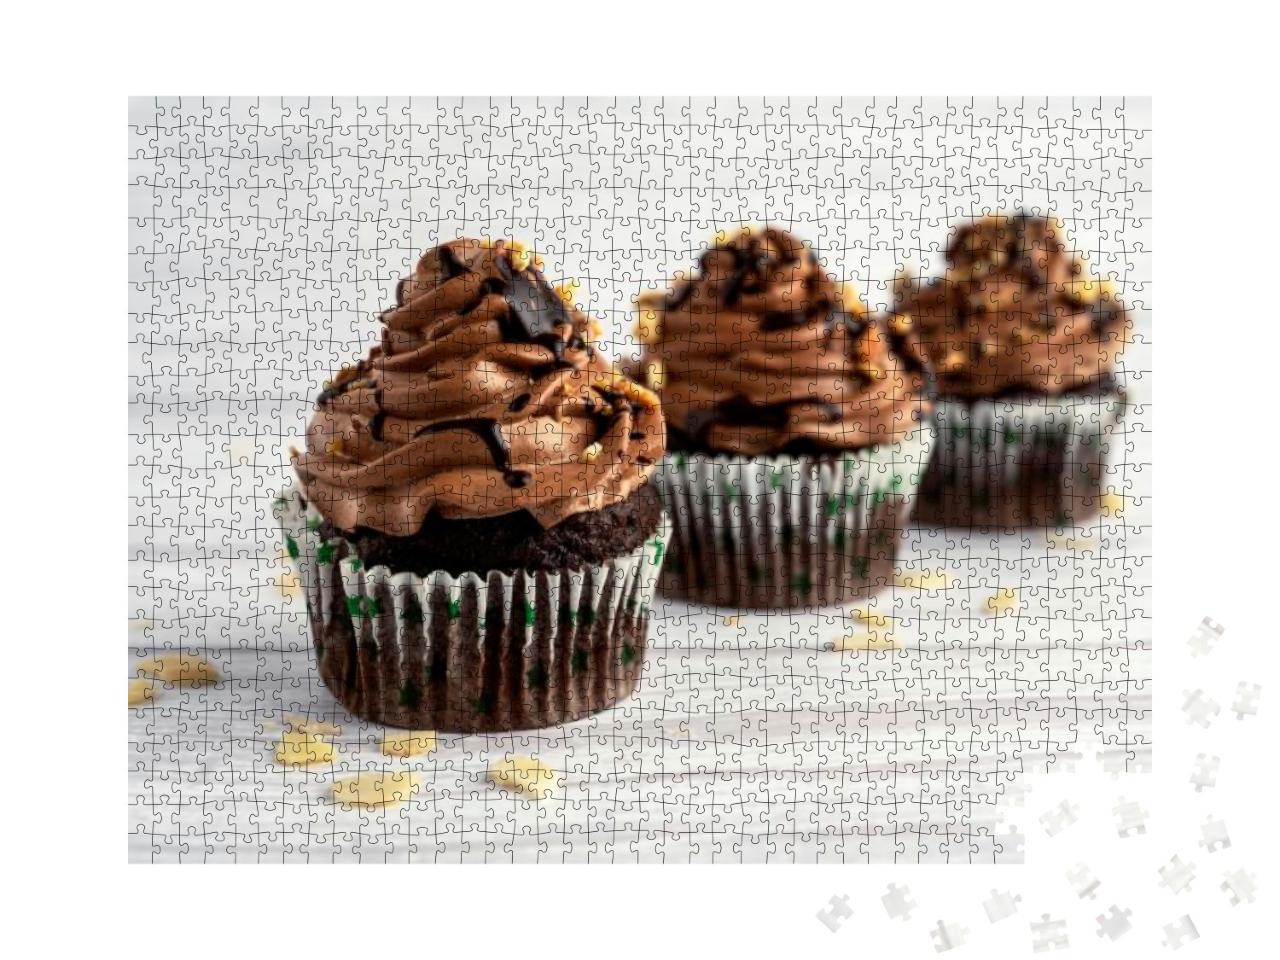 Delicious Chocolate Cupcake on White Wooden Table... Jigsaw Puzzle with 1000 pieces